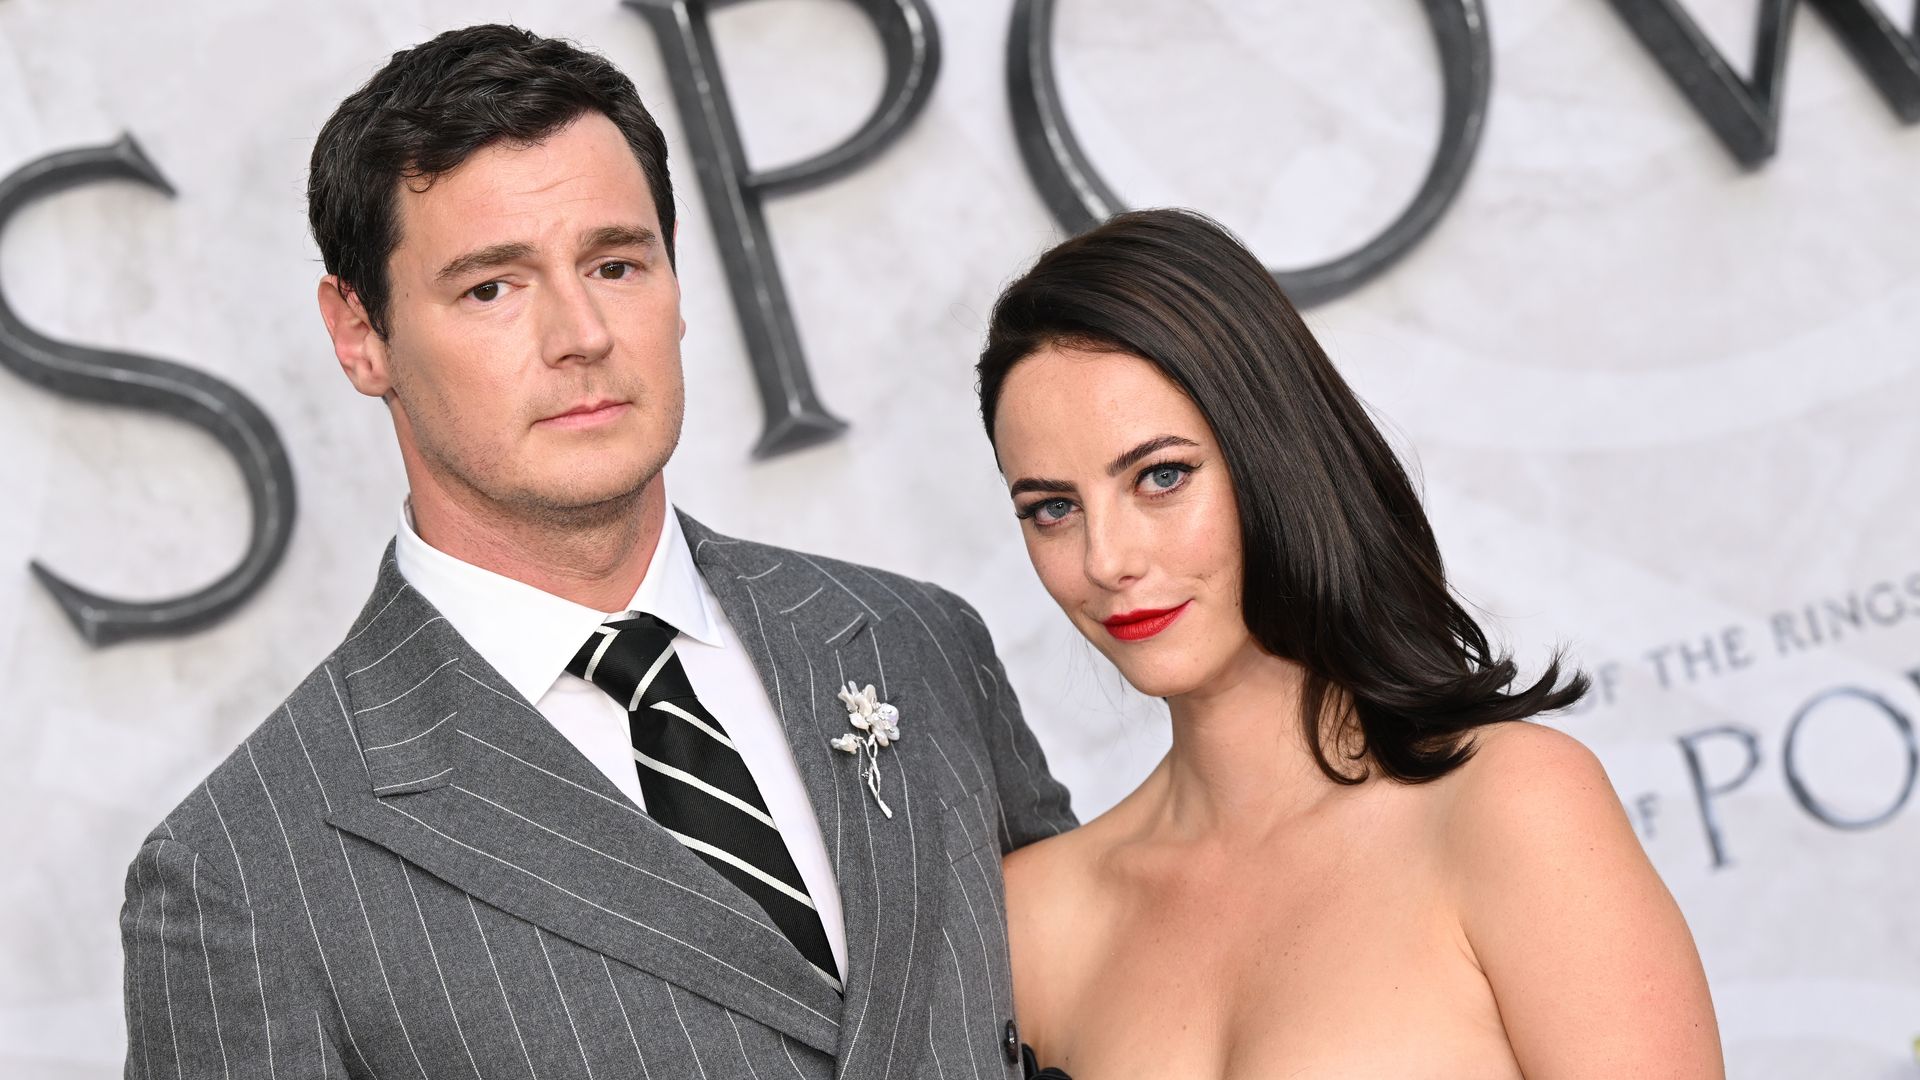 Benjamin Walker and Kaya Scodelario attend "The Lord of the Rings: The Rings of Power" World Premiere at Odeon Luxe Leicester Square on August 30, 2022 in London, England